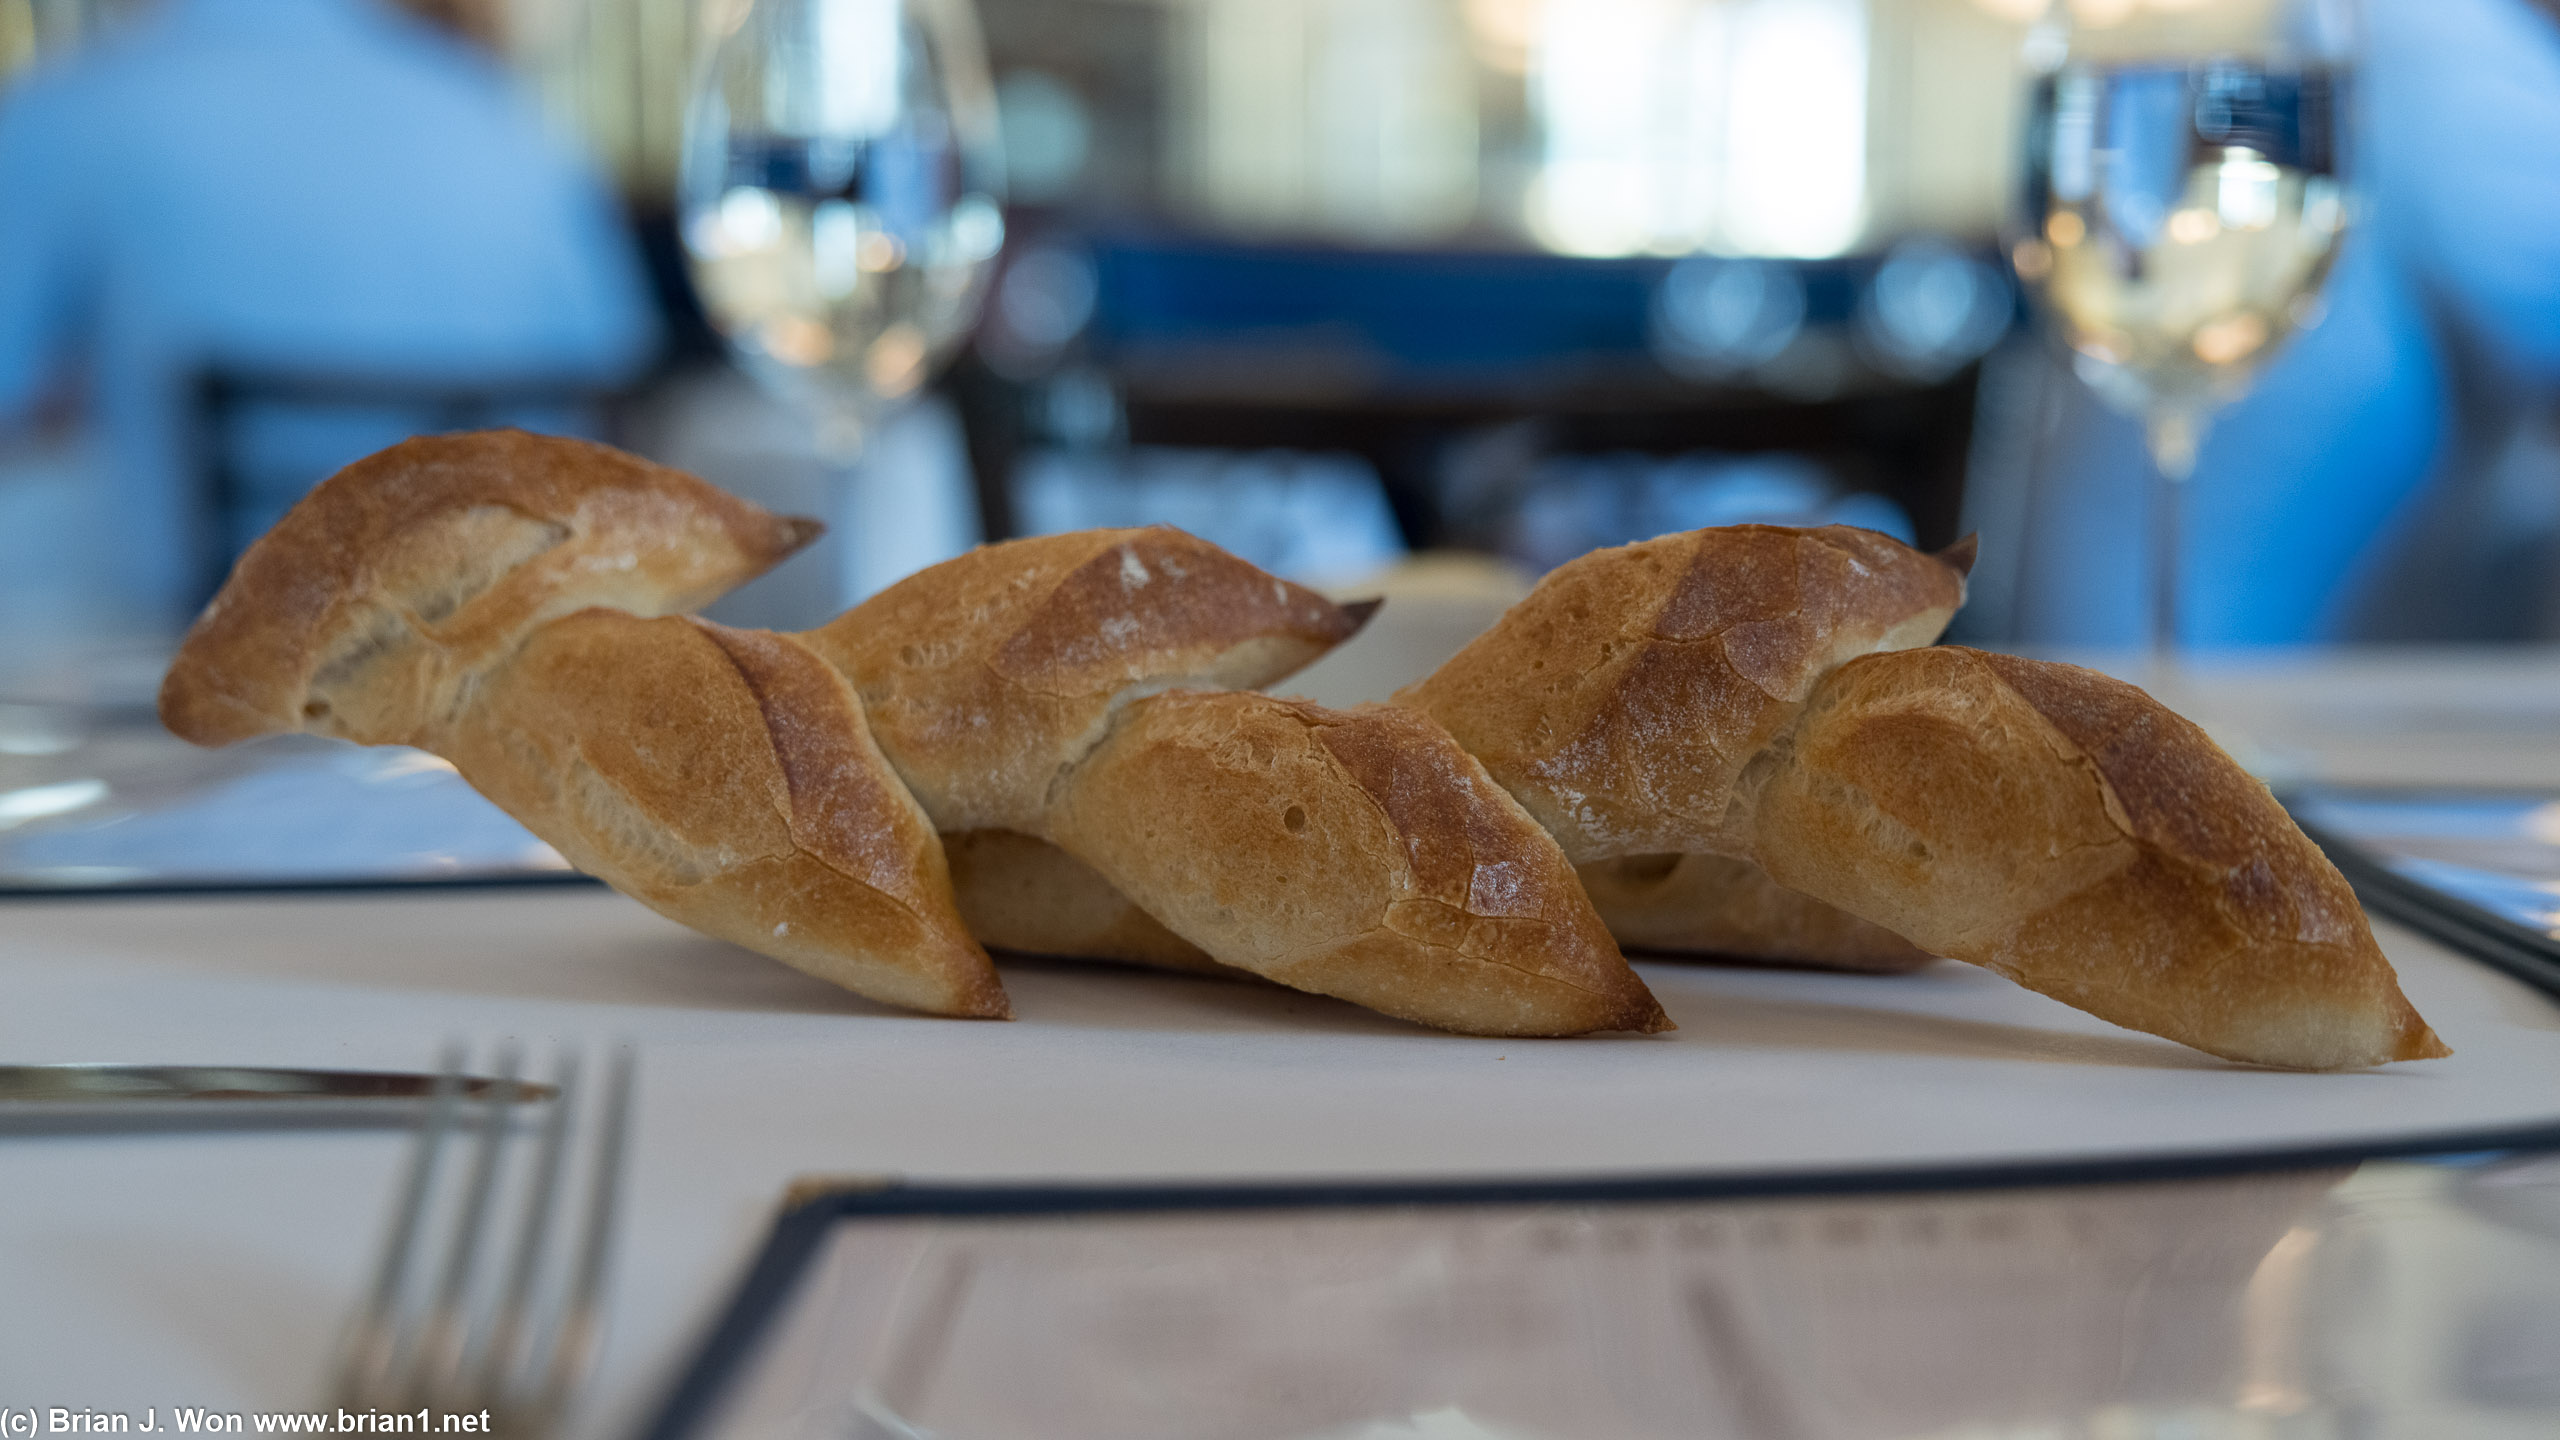 They literally plop bread onto the table at Bouchon.